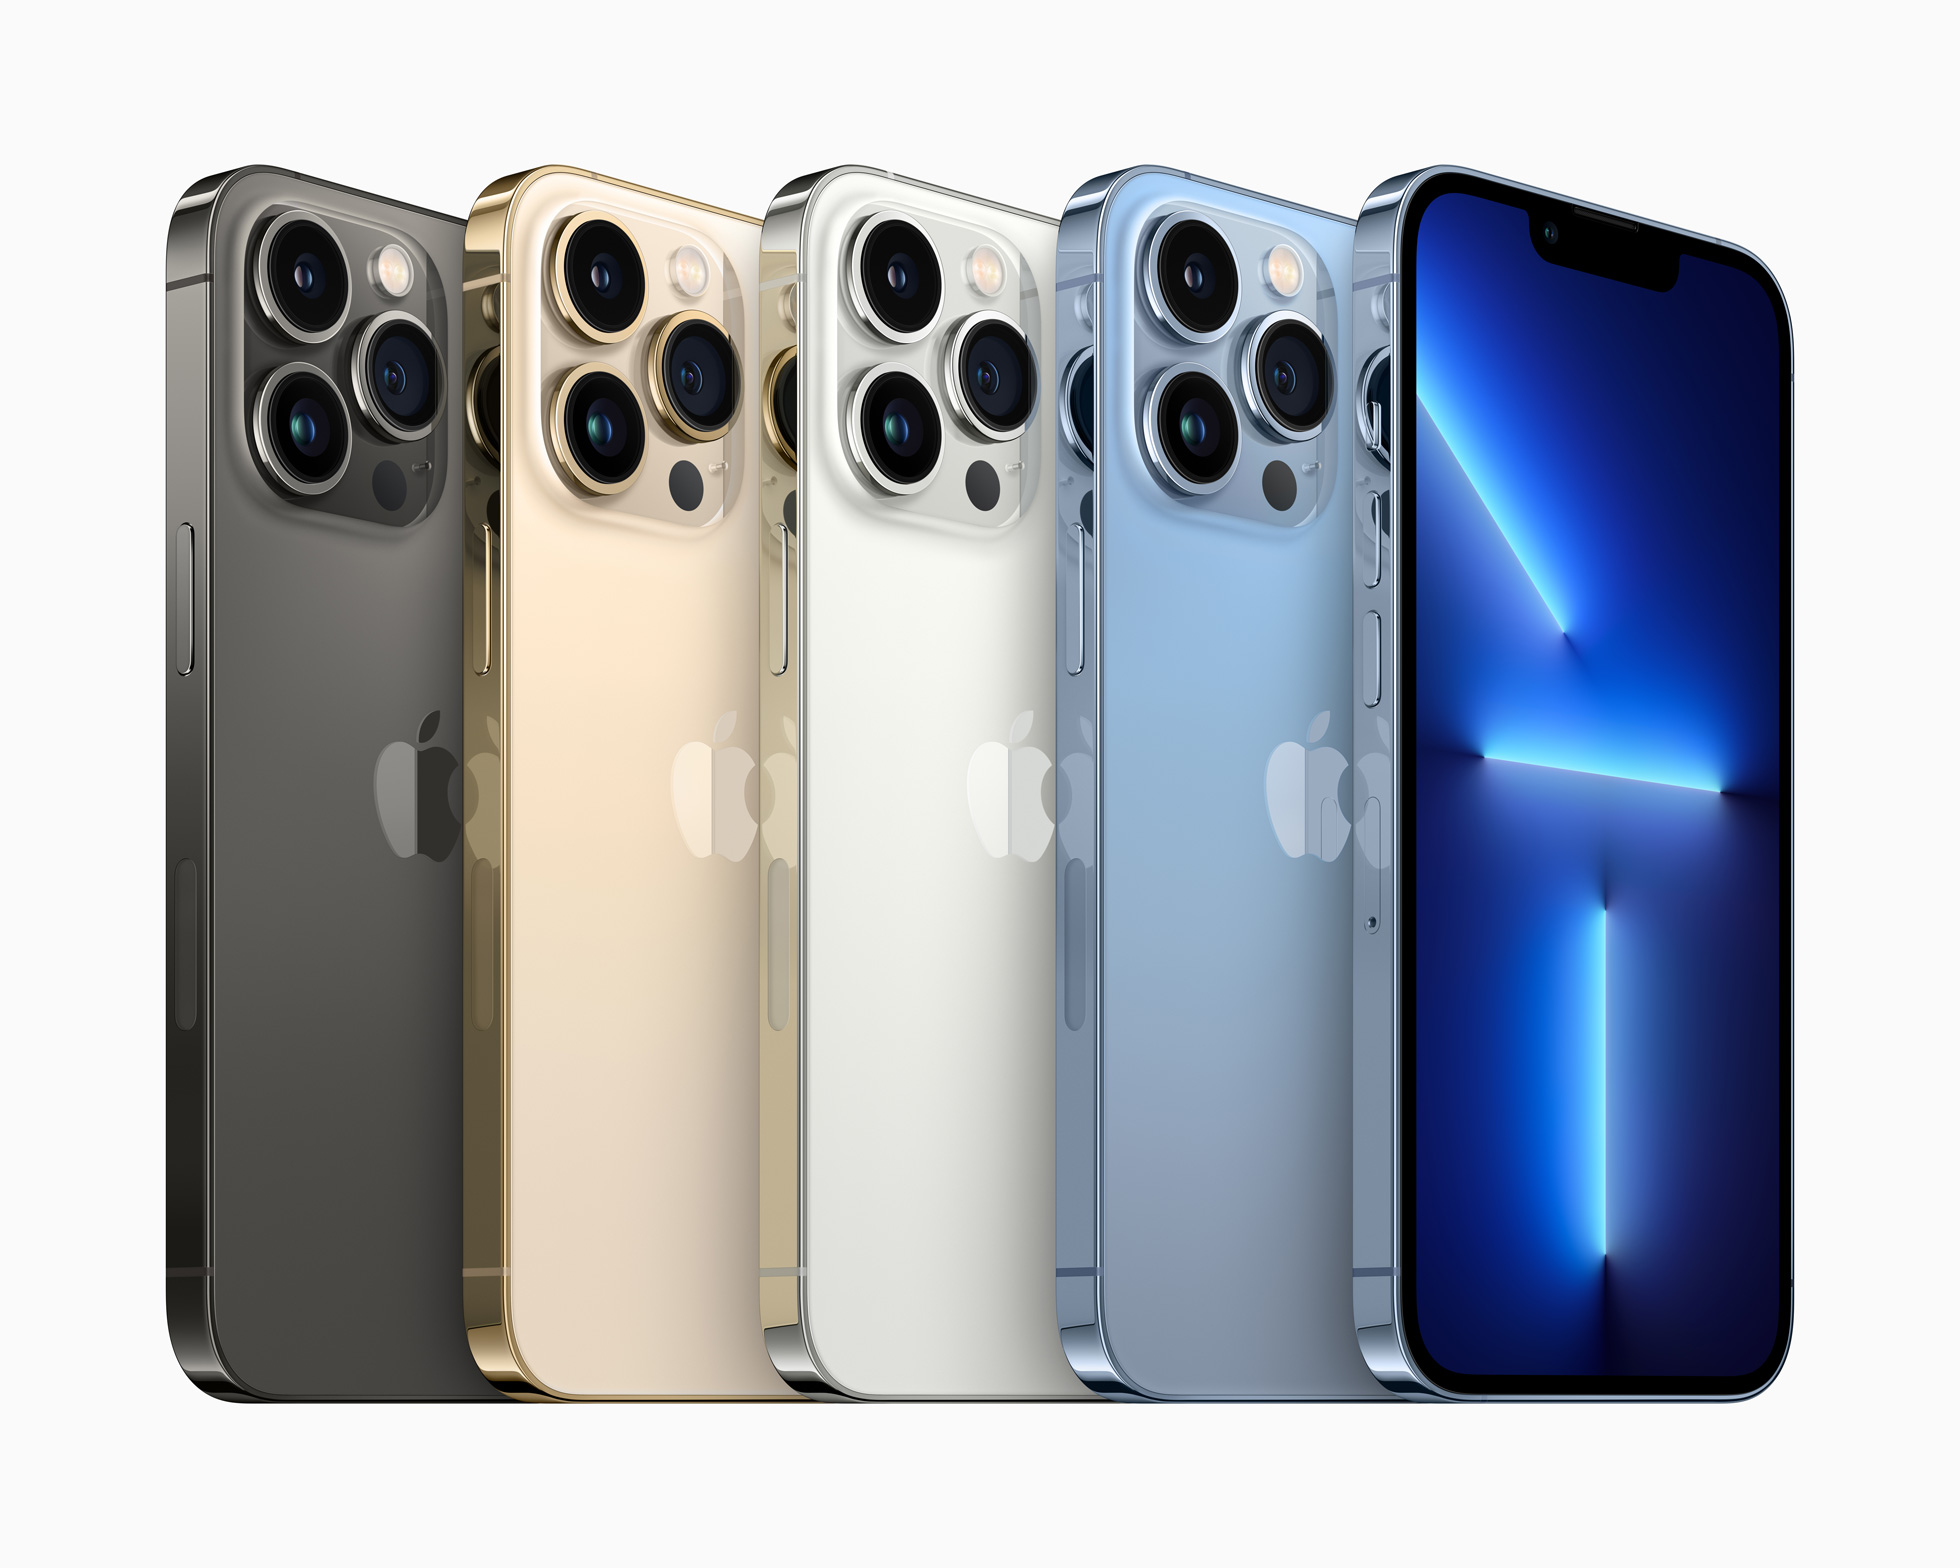 iPhone 13 Event: What Was Released on Apple’s September 2021 Event?